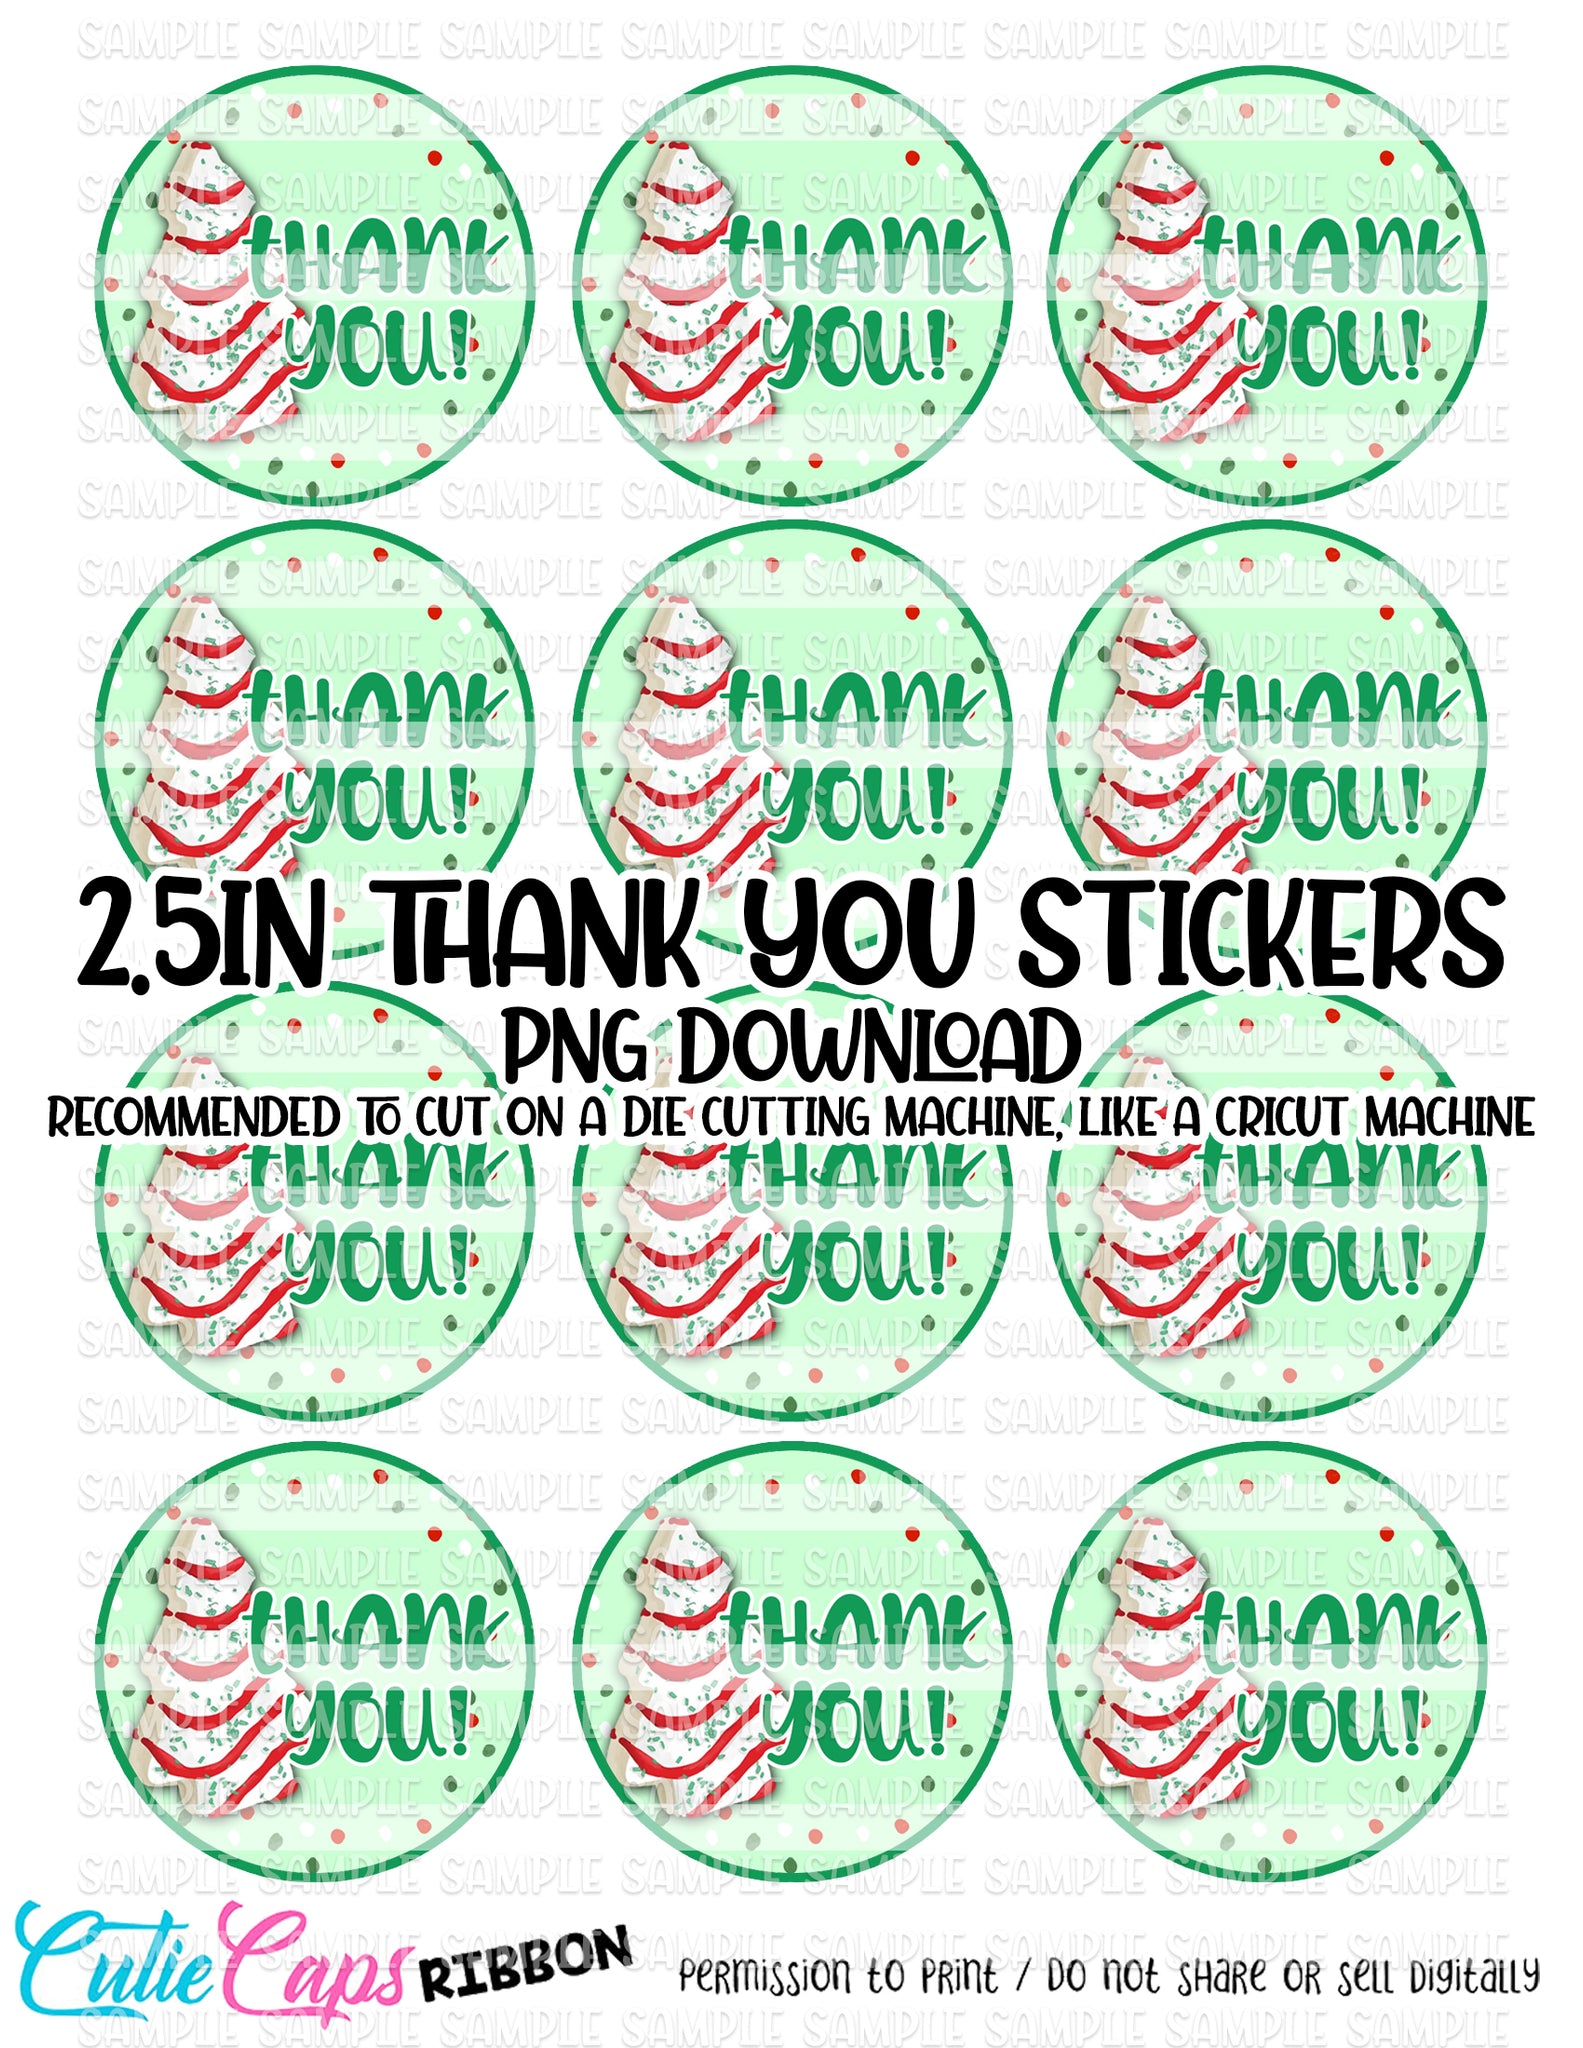 Thank You Sticker Sheet, 2.5in" images